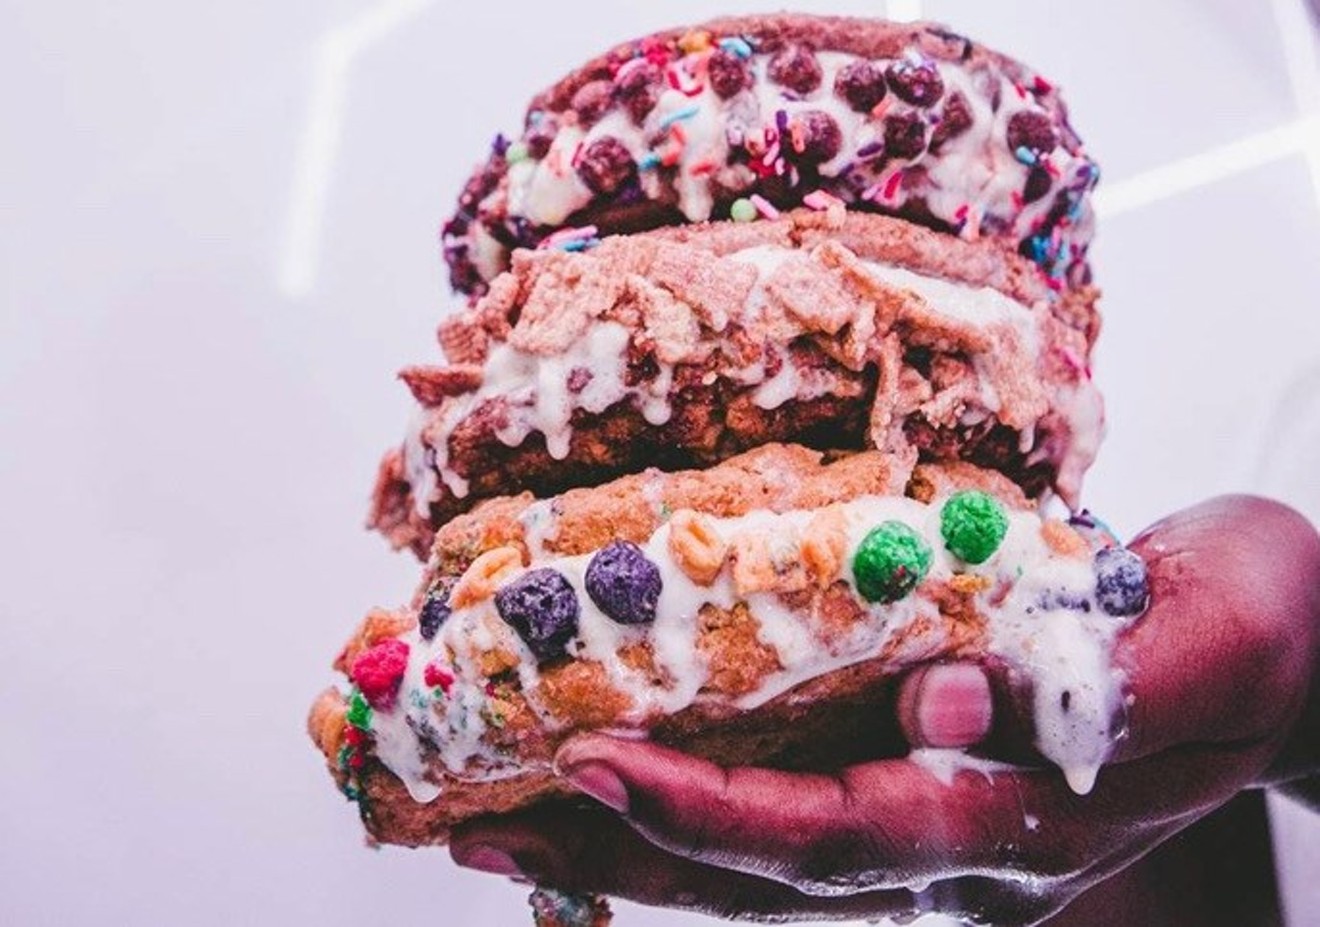 Ice Cream Heaven is Miami Gardens' only black-owned parlor.